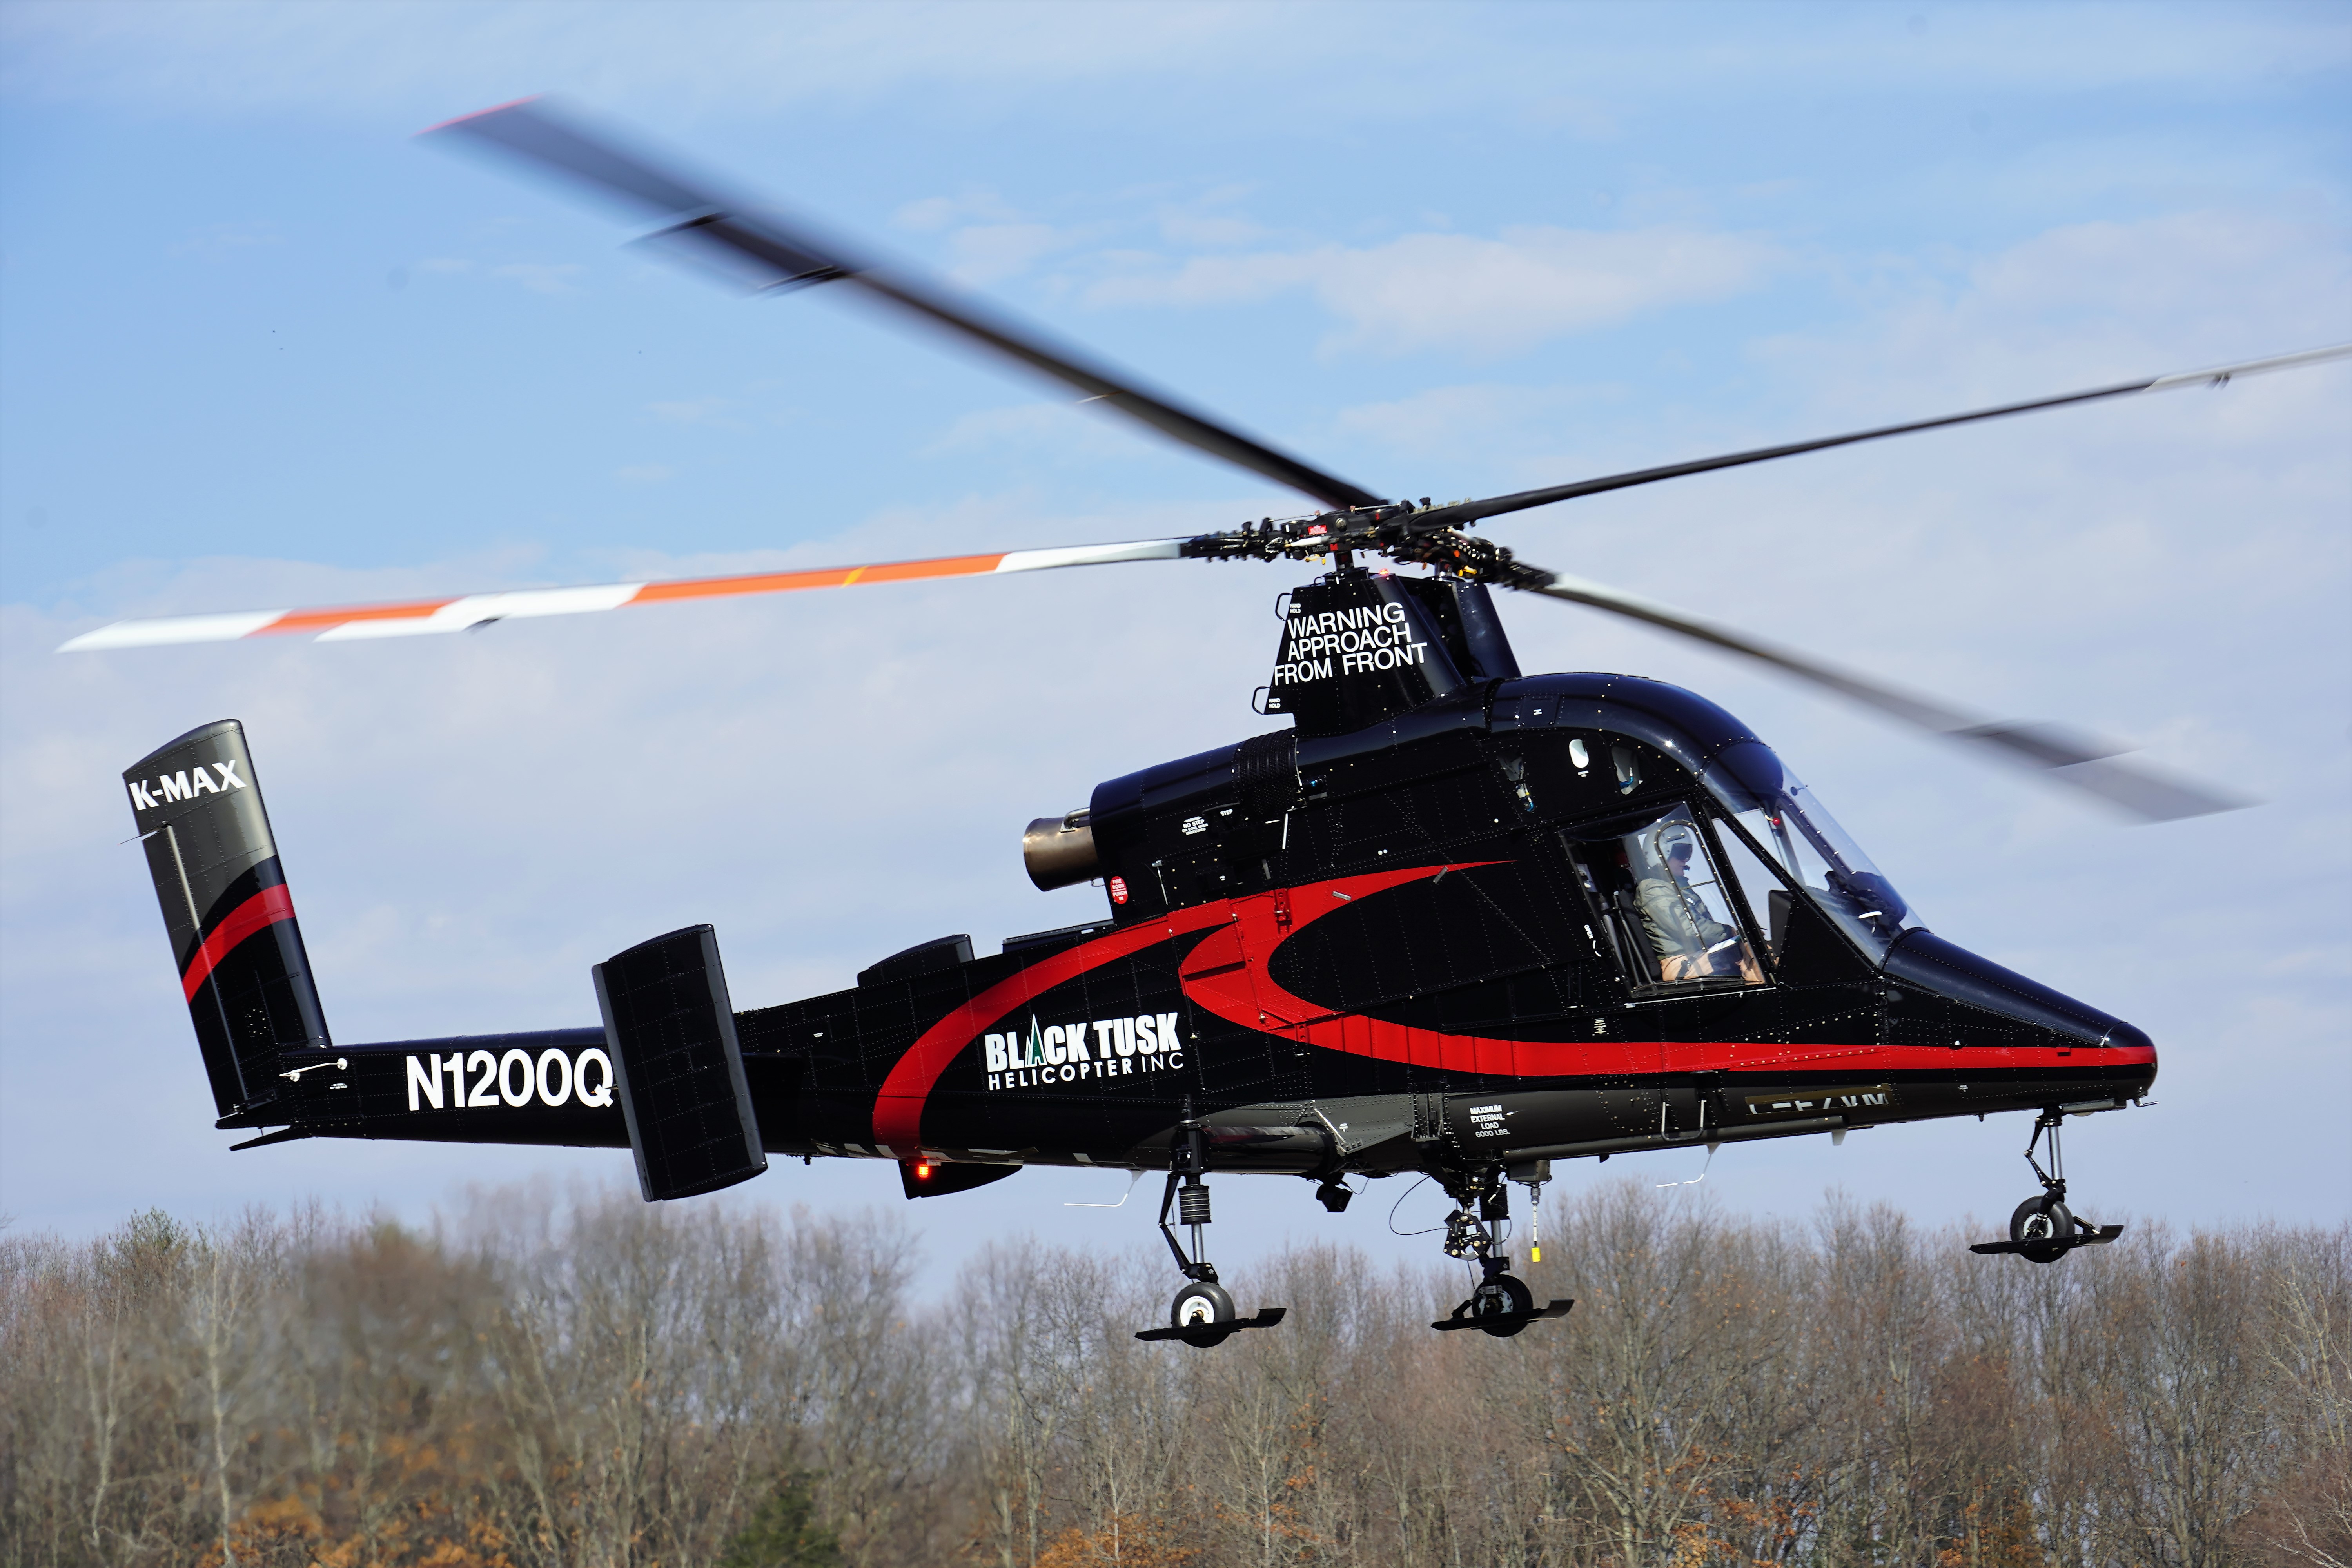 Kaman Delivers New K-MAX® to Black Tusk Helicopter INC.